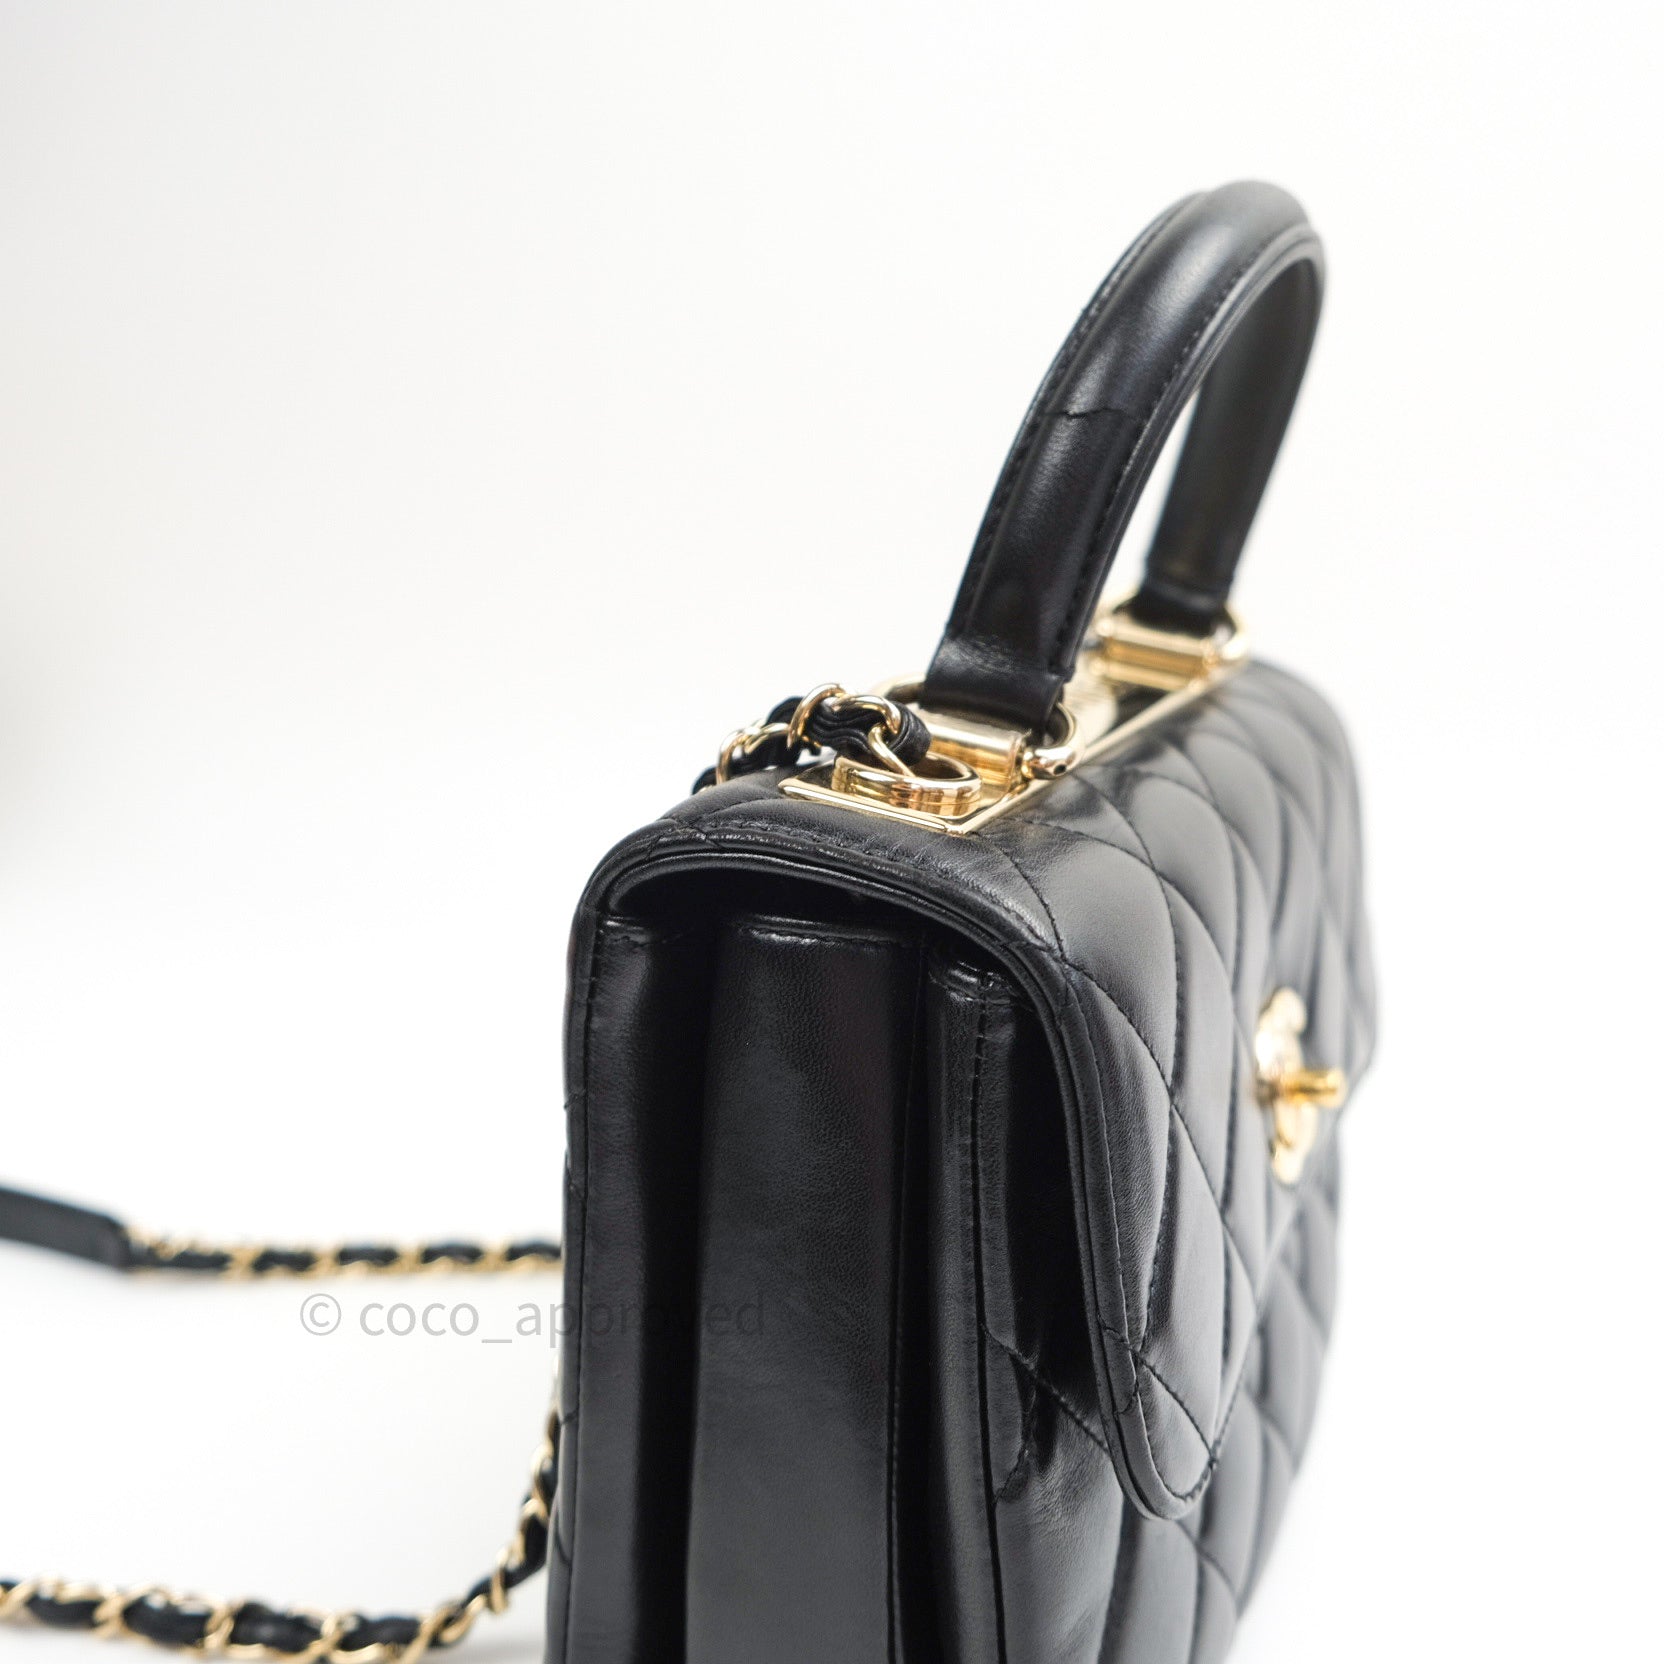 Chanel Small Trendy CC Black Lambskin Gold Hardware – Coco Approved Studio